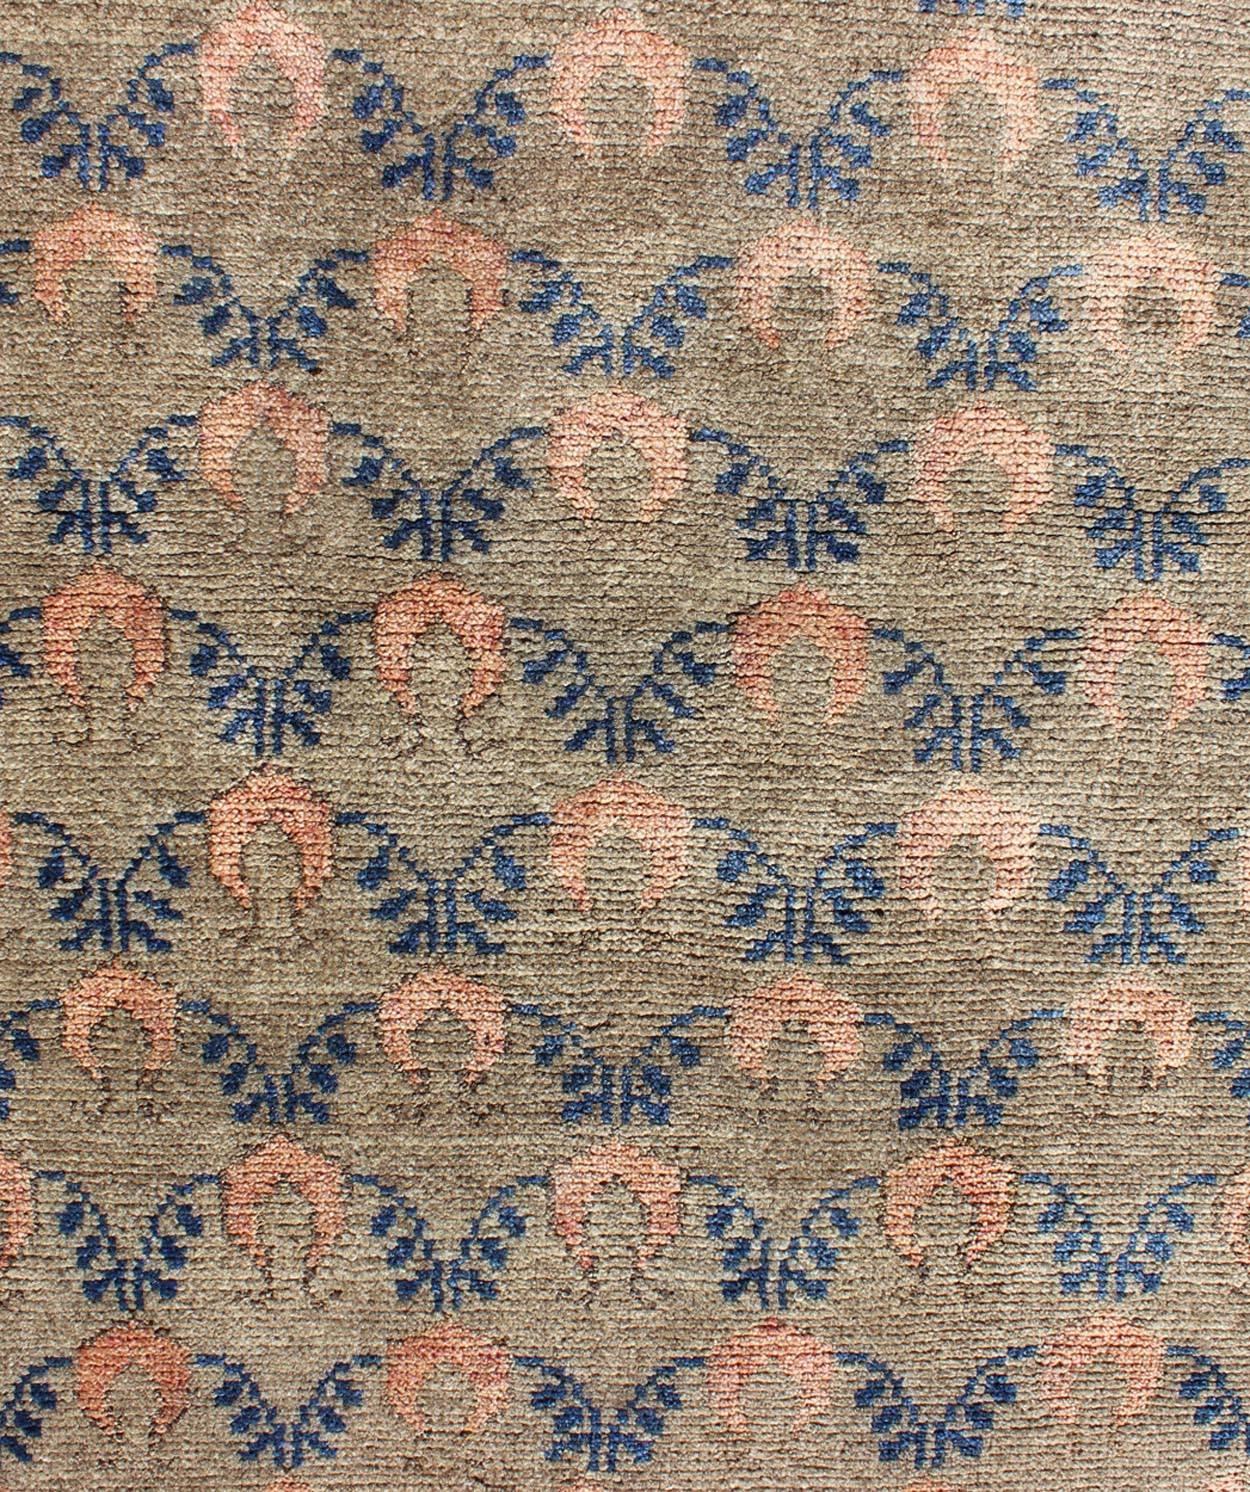 Wool All-Over Vintage Turkish Tulu Rug with Vining Latticework in Tan, Cream and Blue For Sale